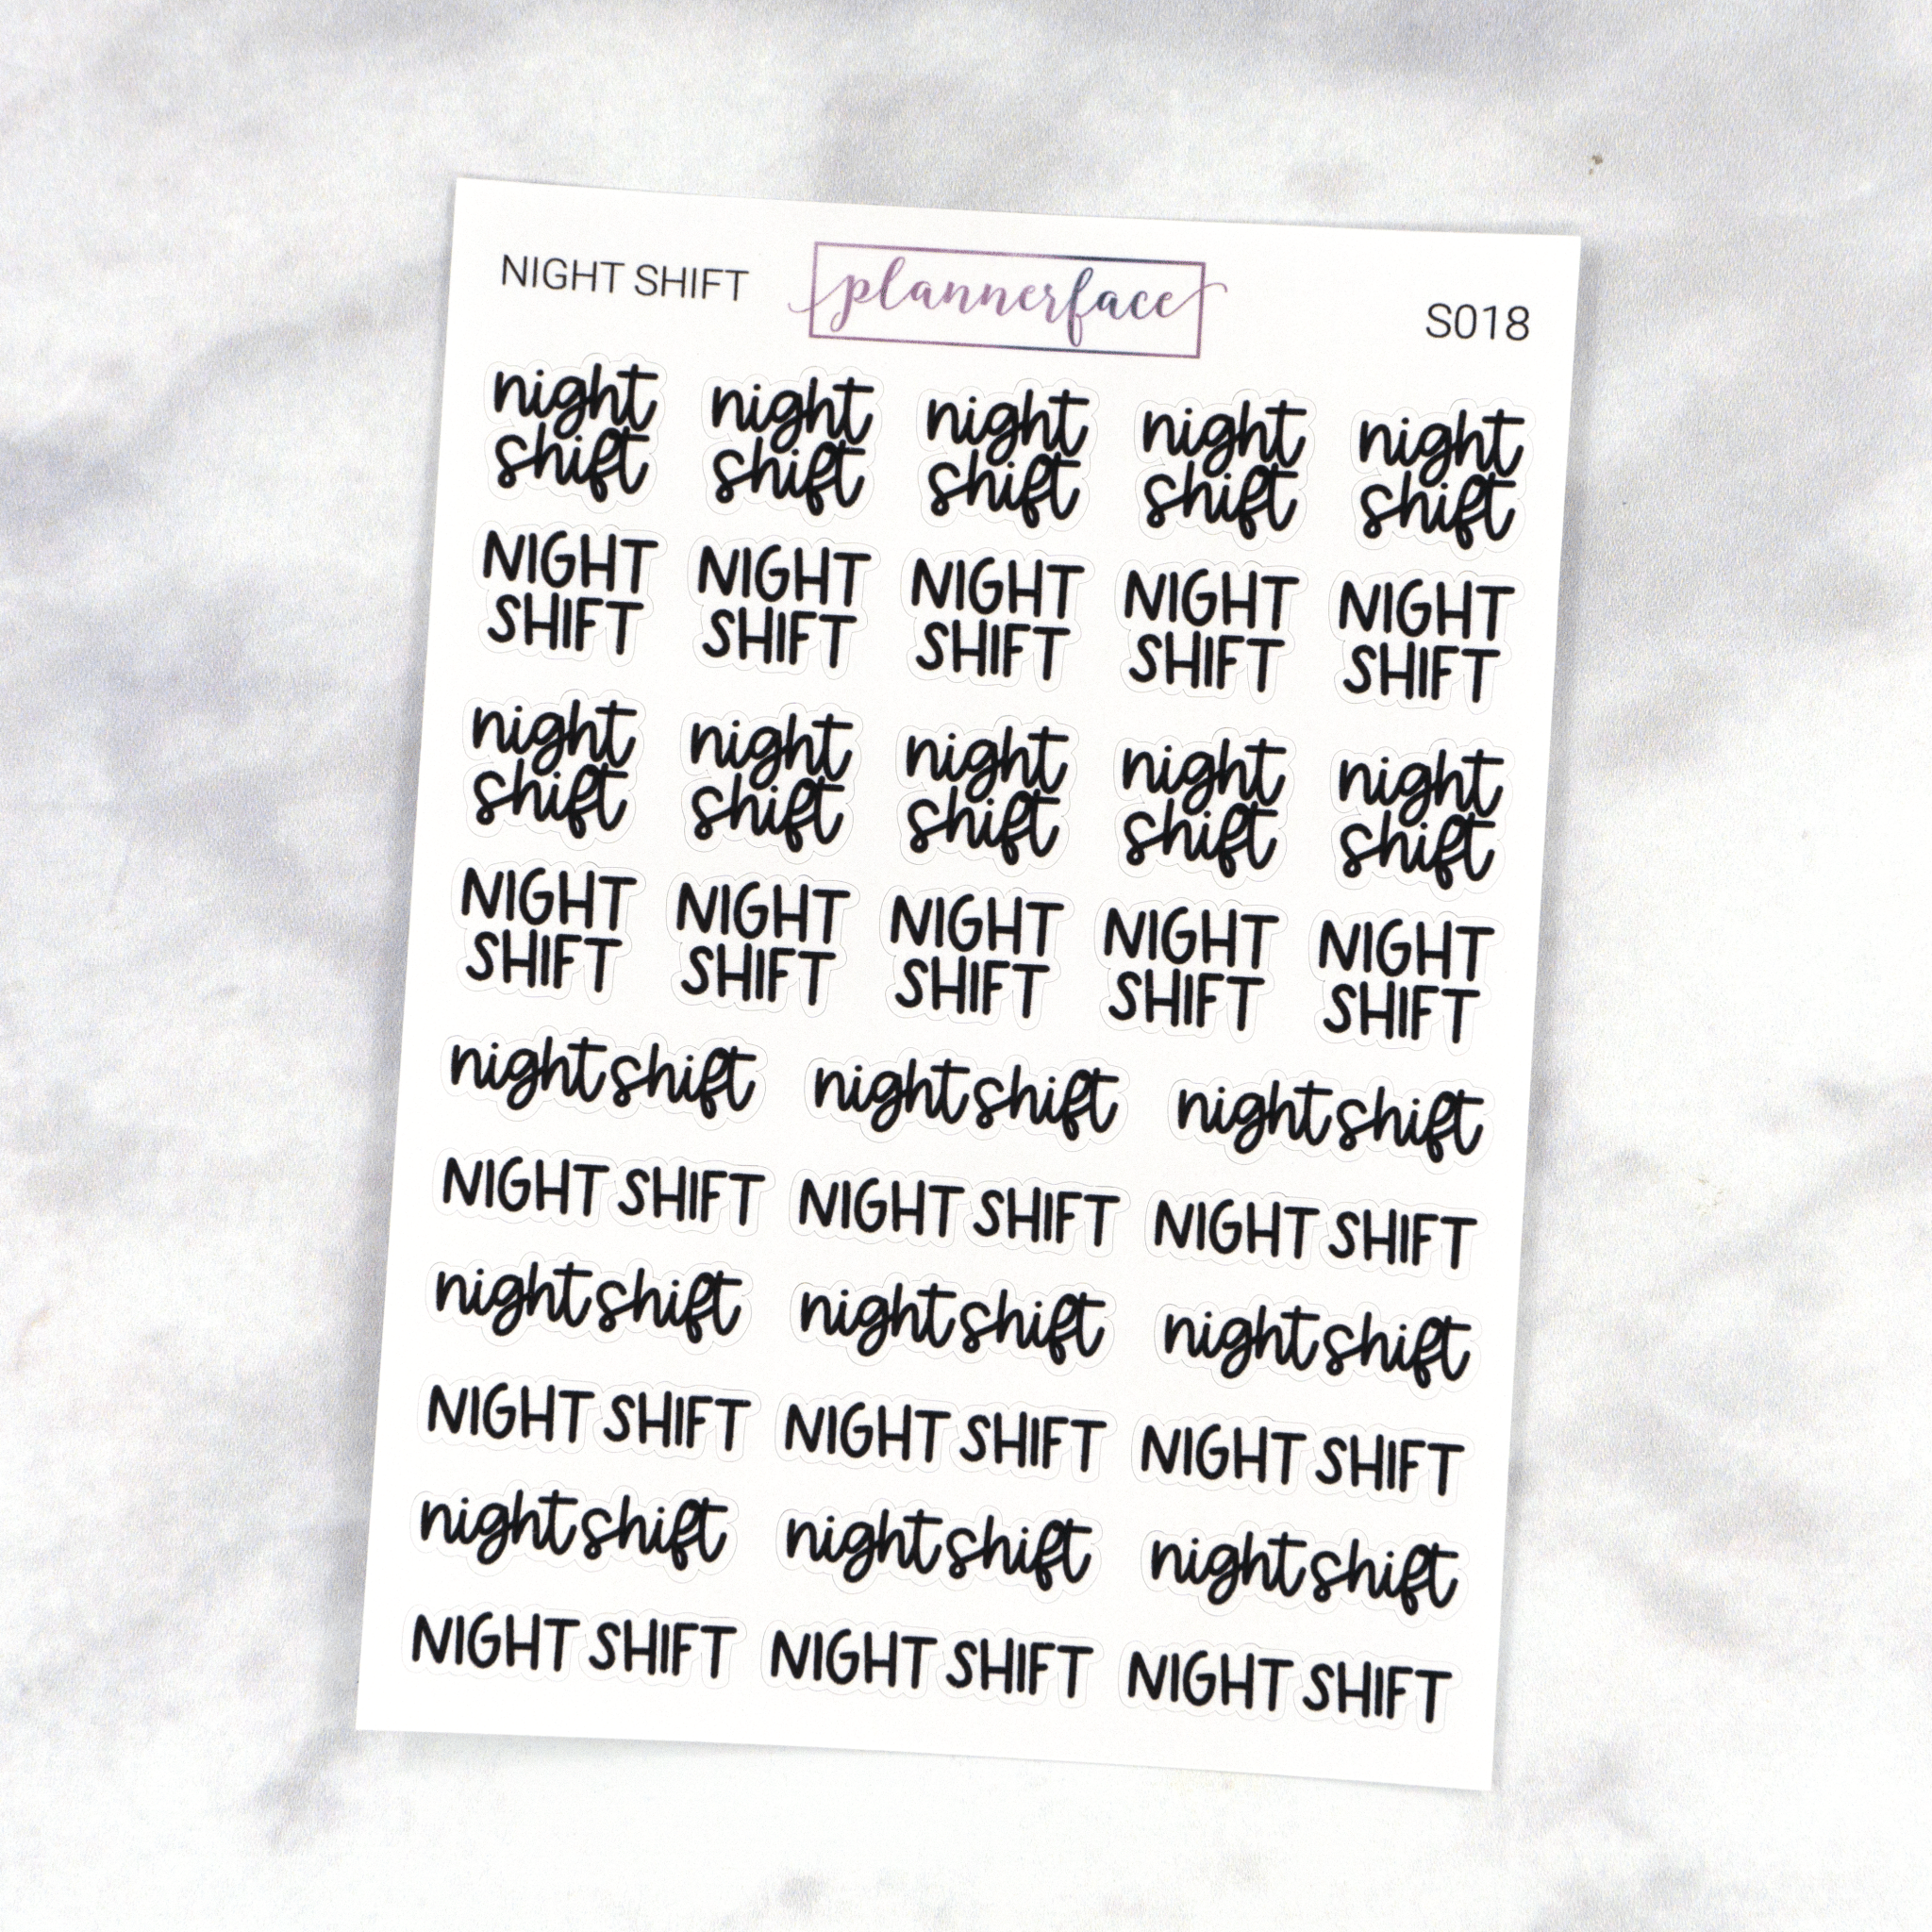 Night Shift | Scripts by Plannerface